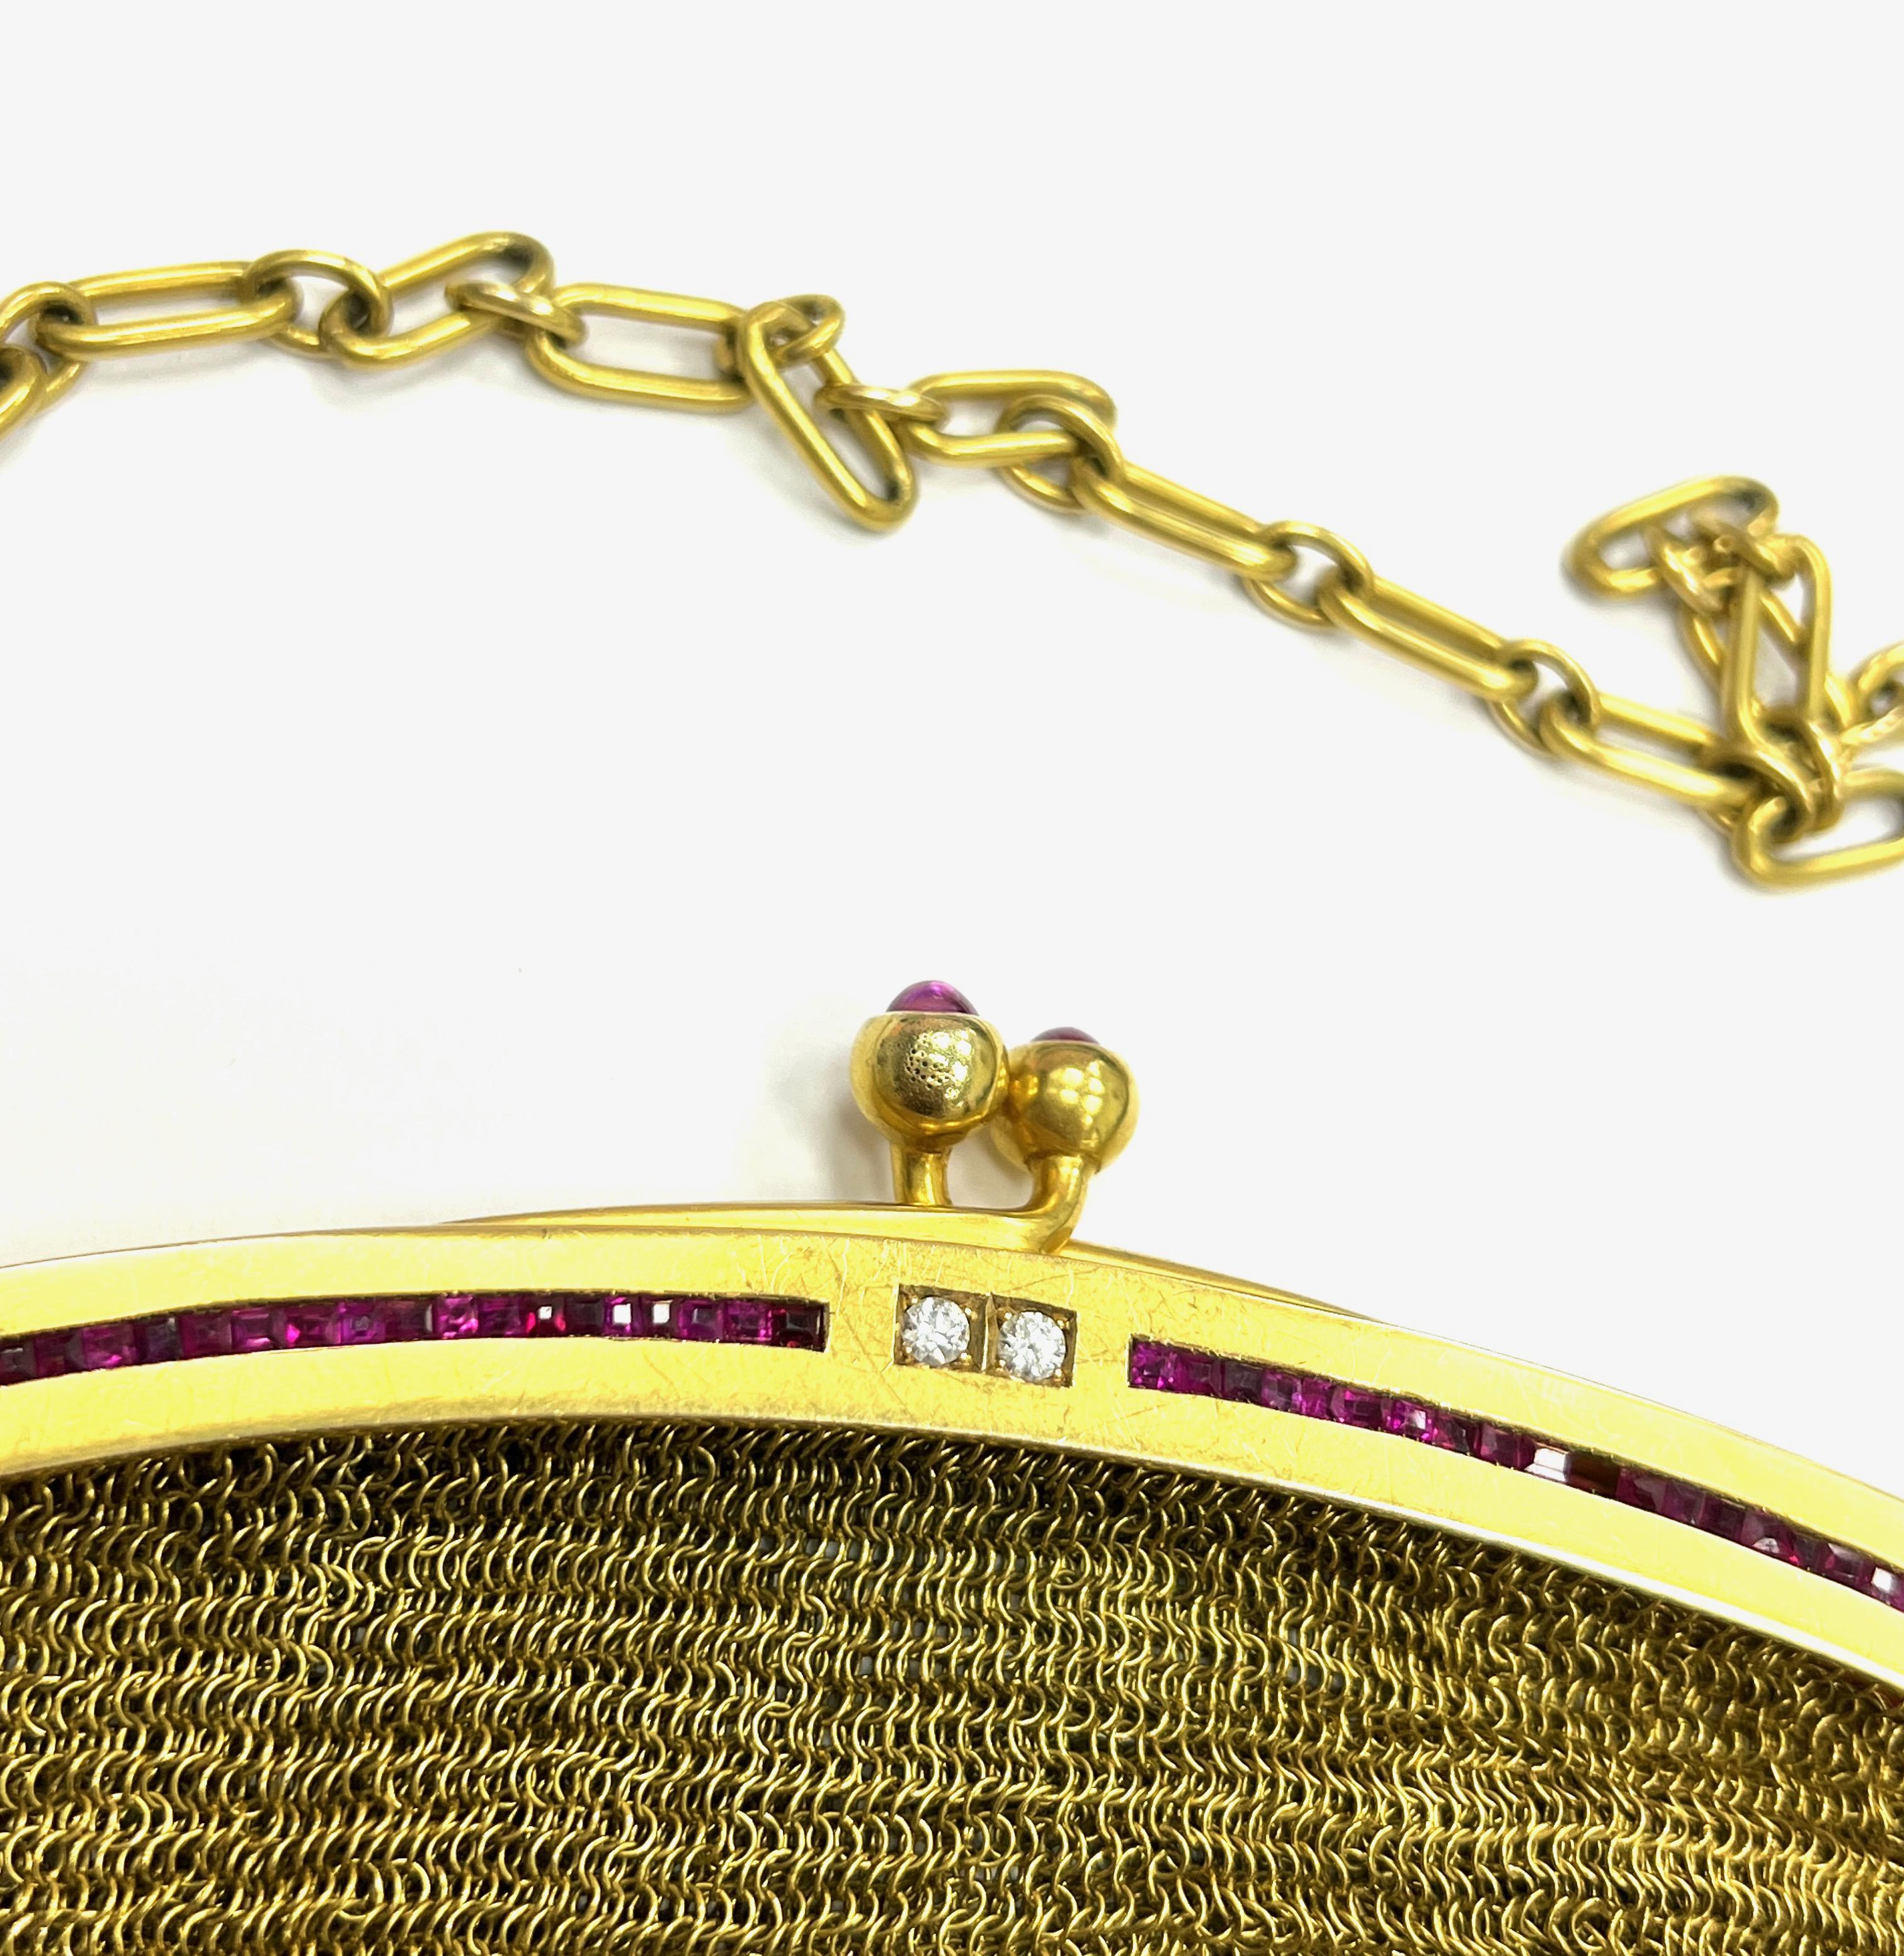 Ruby diamond mesh gold purse, 19th century 

Cabochon and square-cut rubies of approximately 8 carats, round-cut diamonds of approximately 0.75 carat, 18 karat yellow gold

Size: width 6.5 inches, length 7 inches
Total weight: 277.9 grams